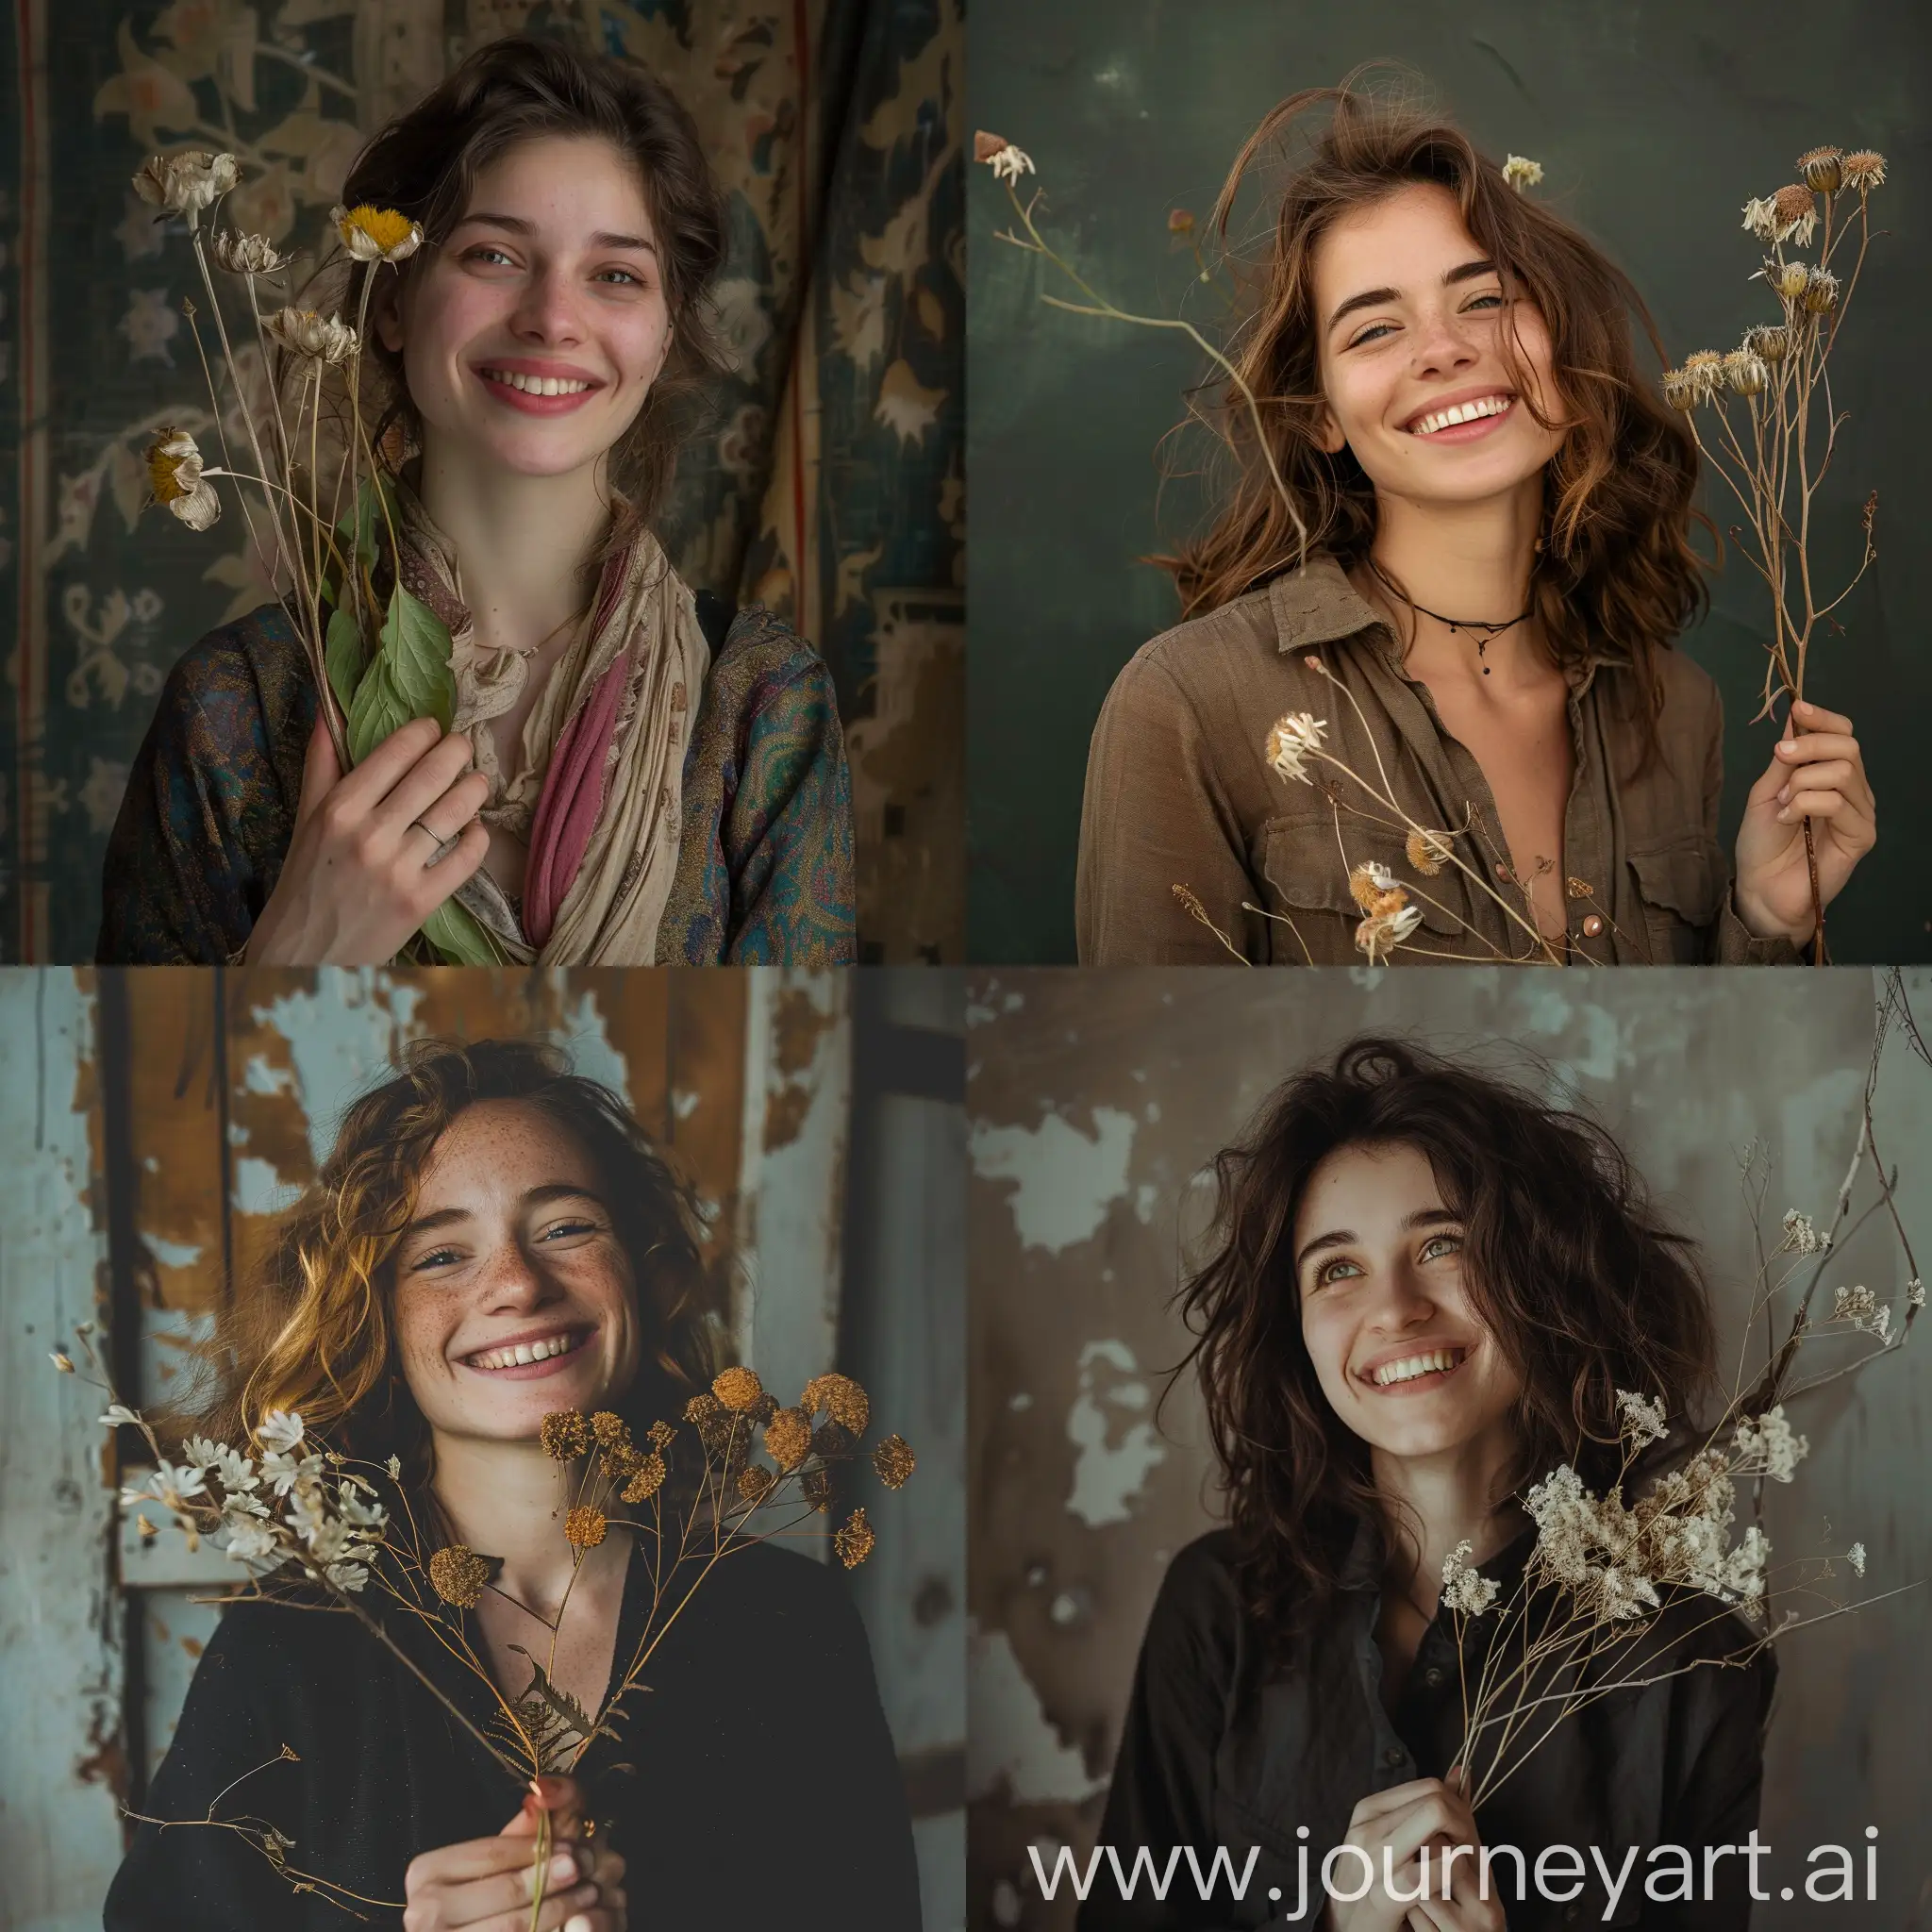 A woman holding dead flowers, smiling, artistic composition, photo